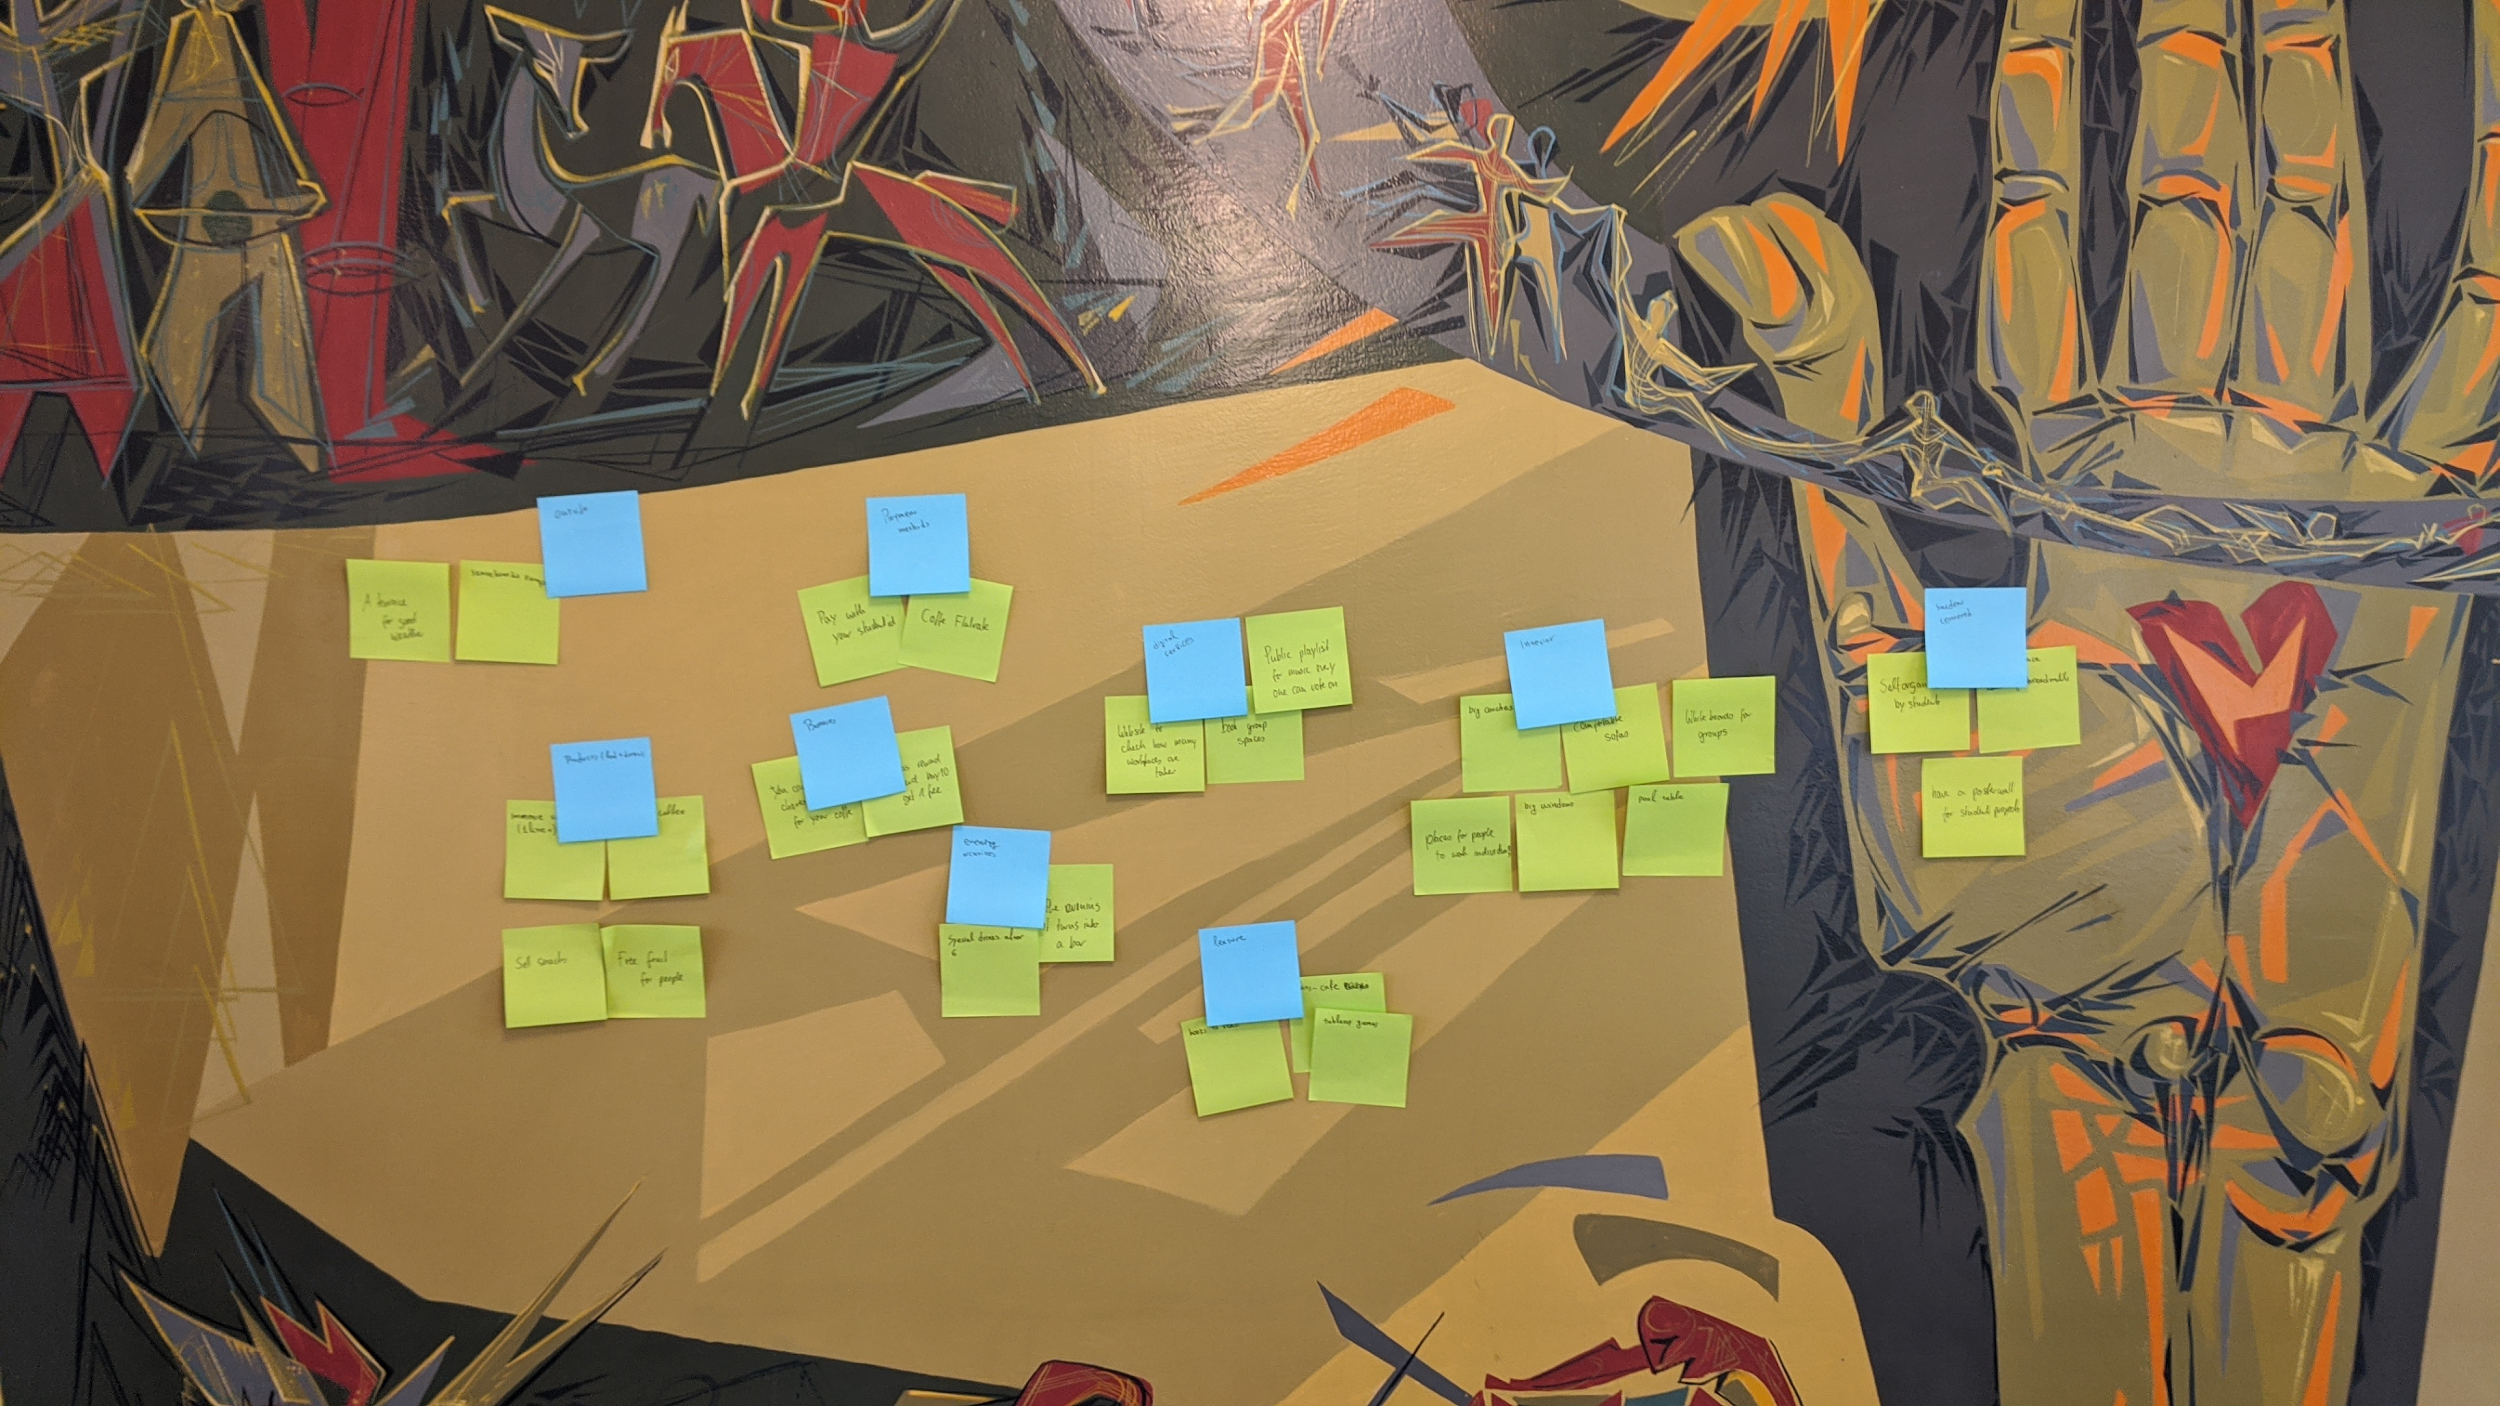 Brainstorming with Post-its